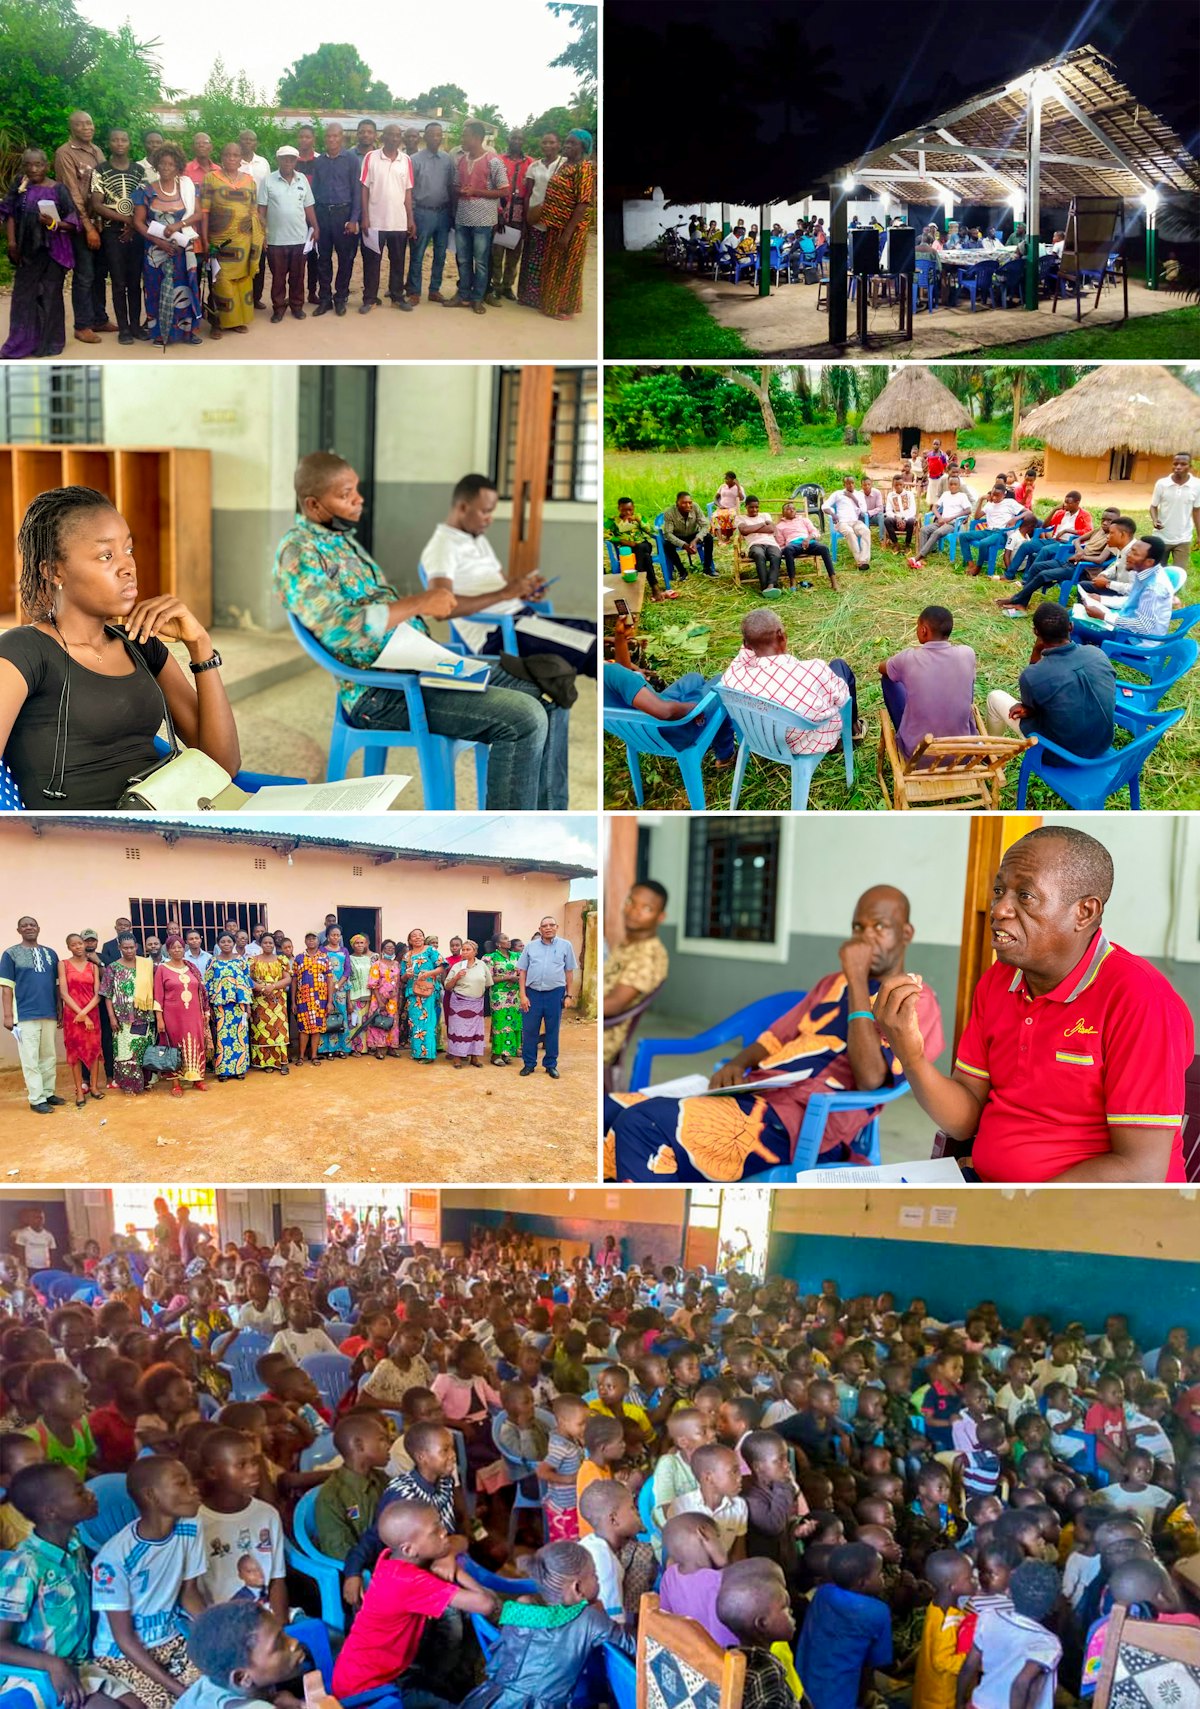 Pictured here are some of the local conferences that are taking place across the Democratic Republic of the Congo.